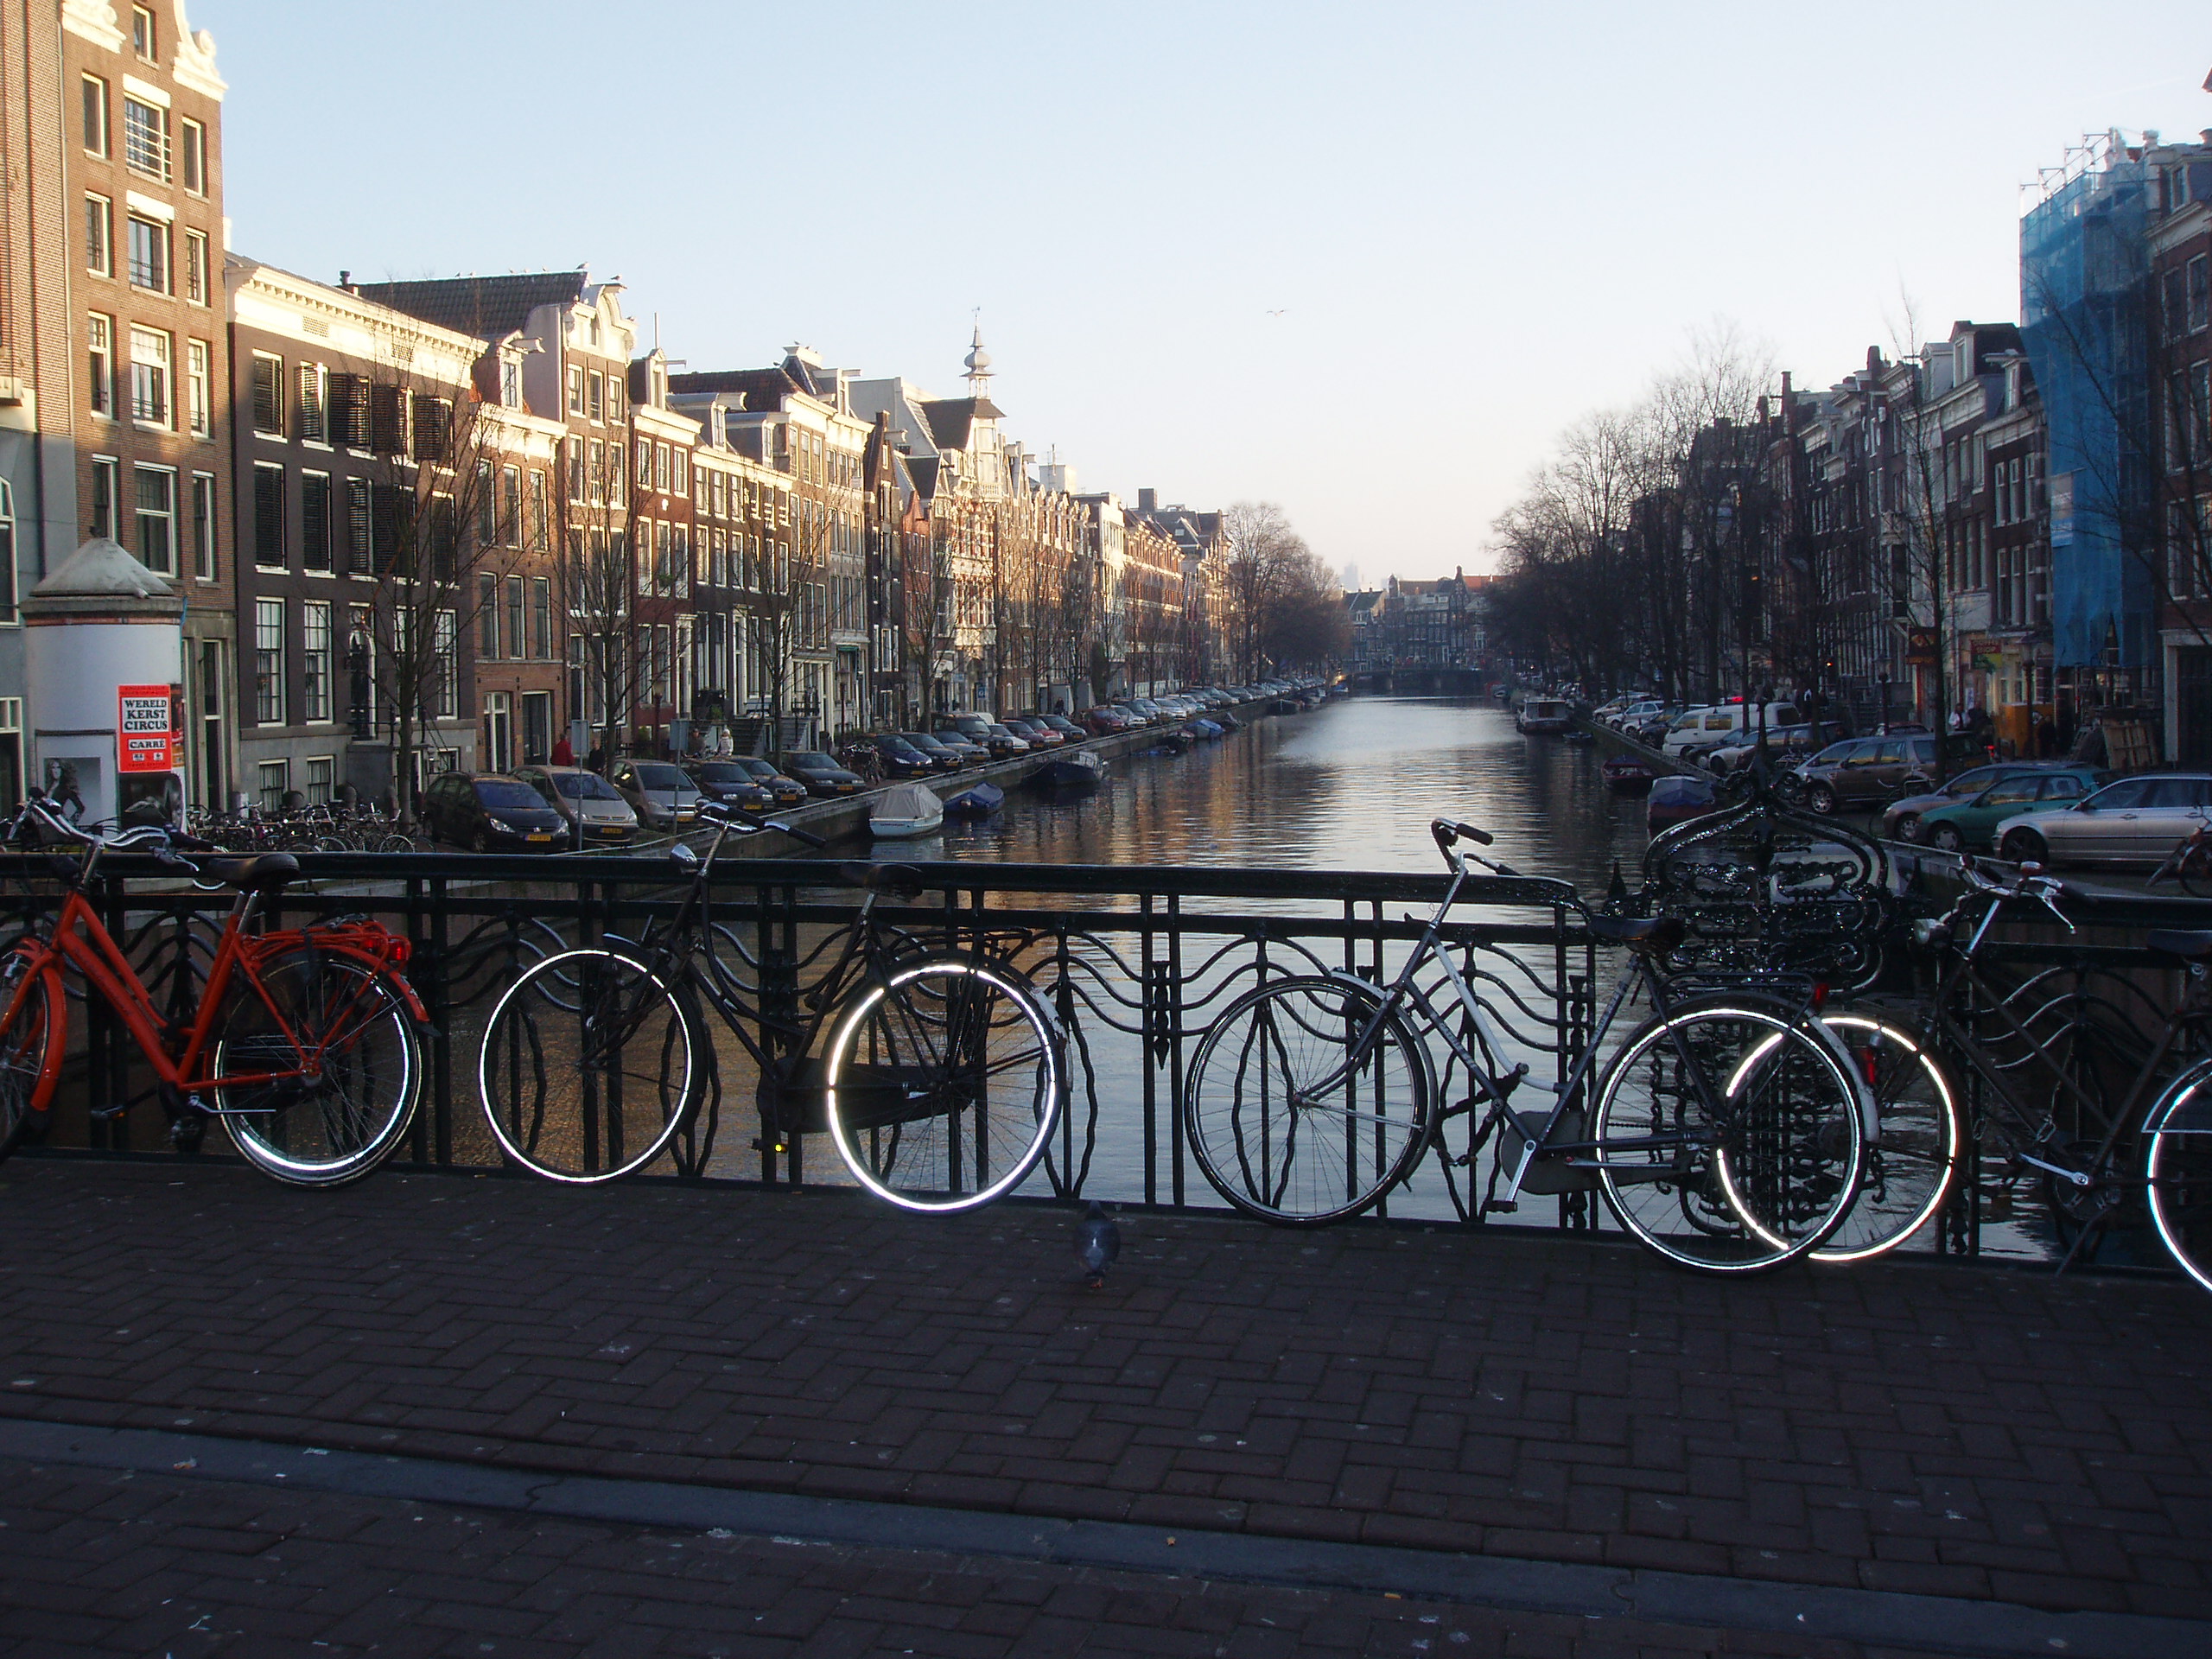 Amsterdam (Kind Of a True Story)